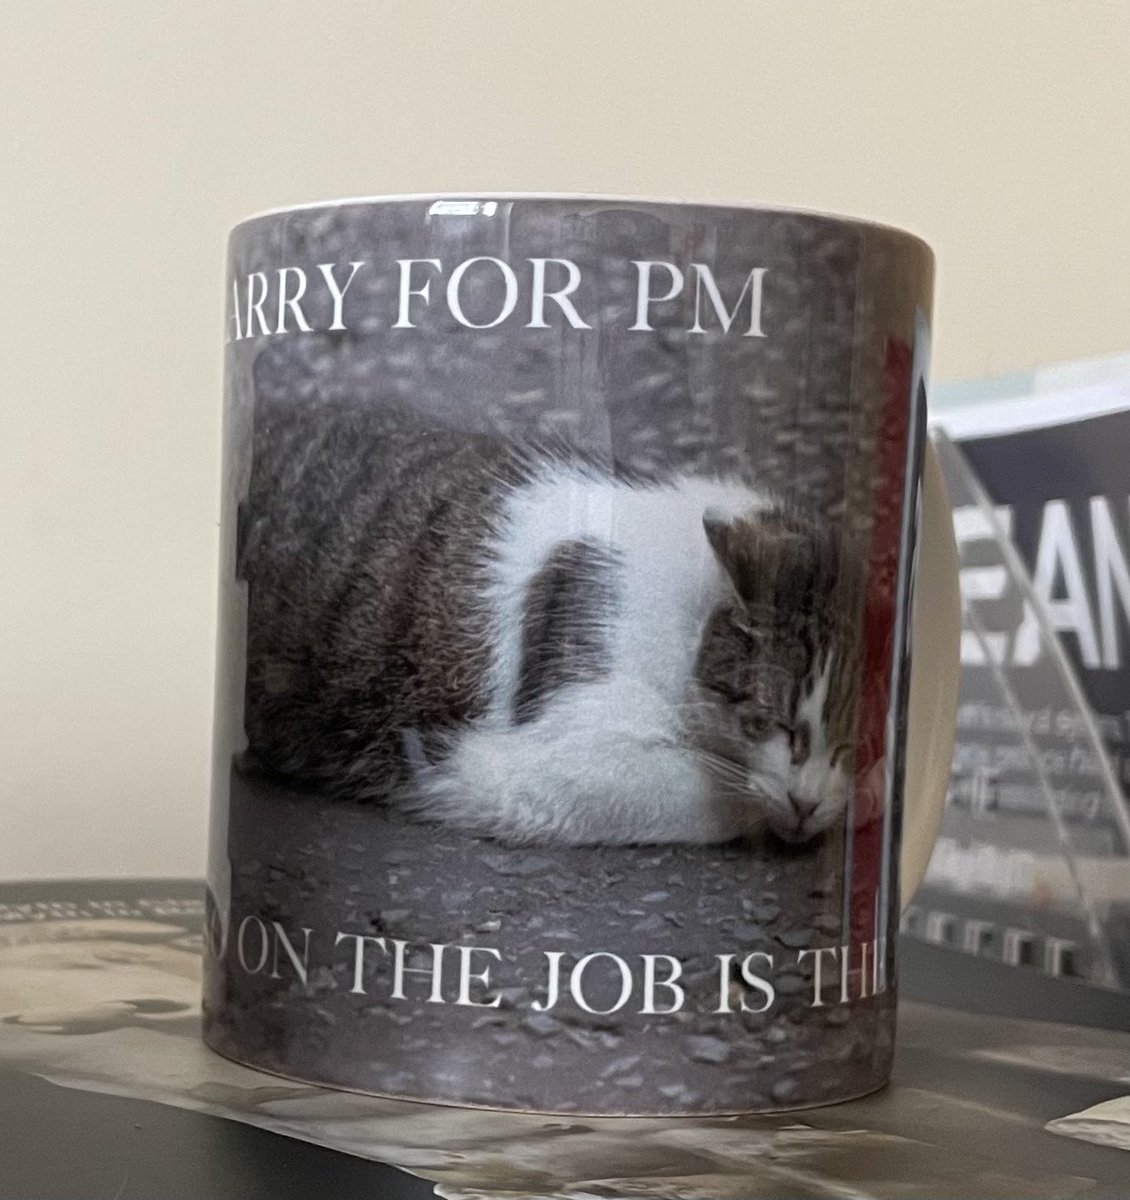 Thank you @justin_ng the mug arrived this morning. I love it 🥰 #LarryforPM @Number10cat